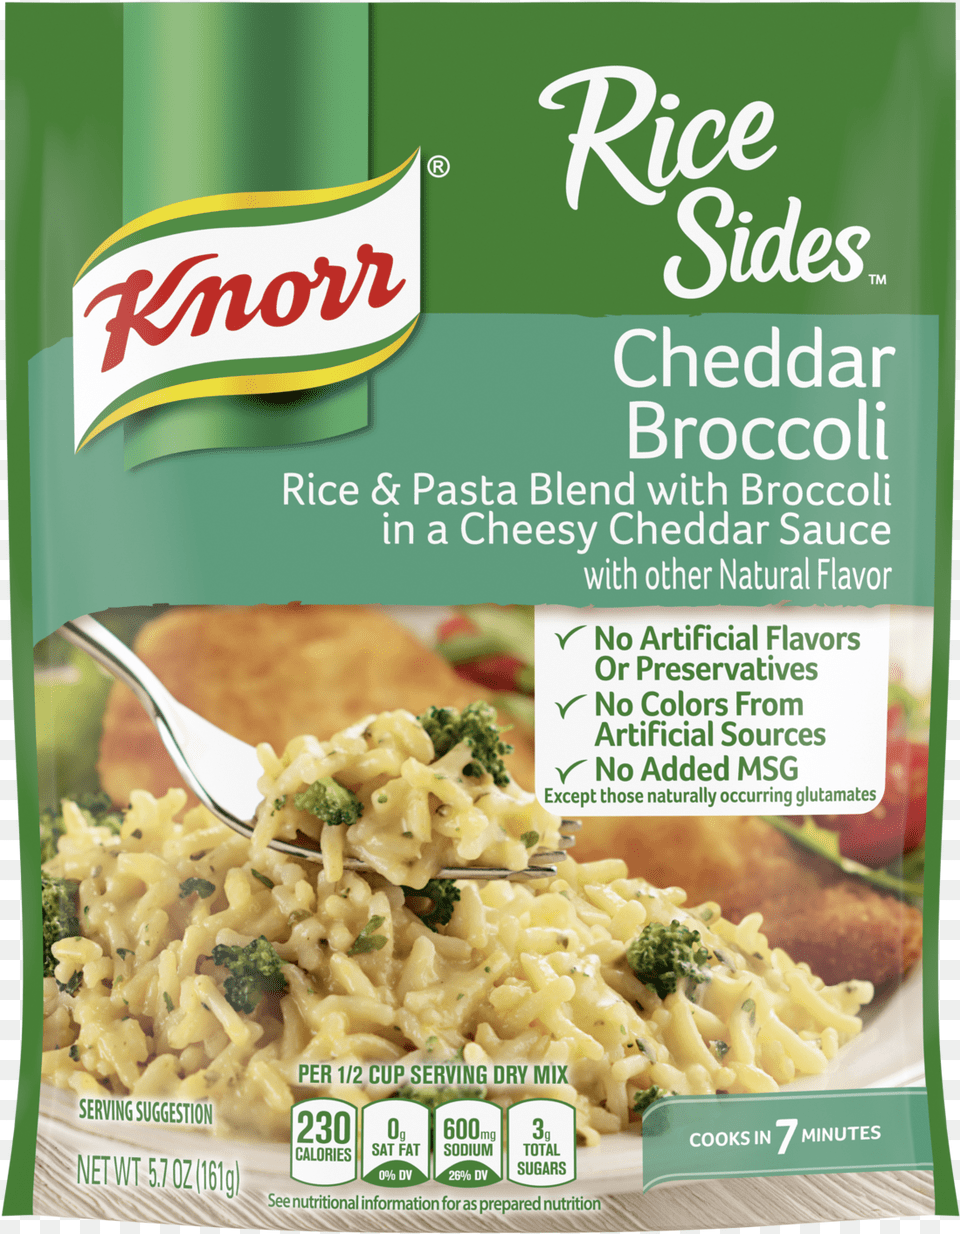 Cheddar Broccoli Knorr Rice Sides, Advertisement, Poster, Food, Macaroni Png Image